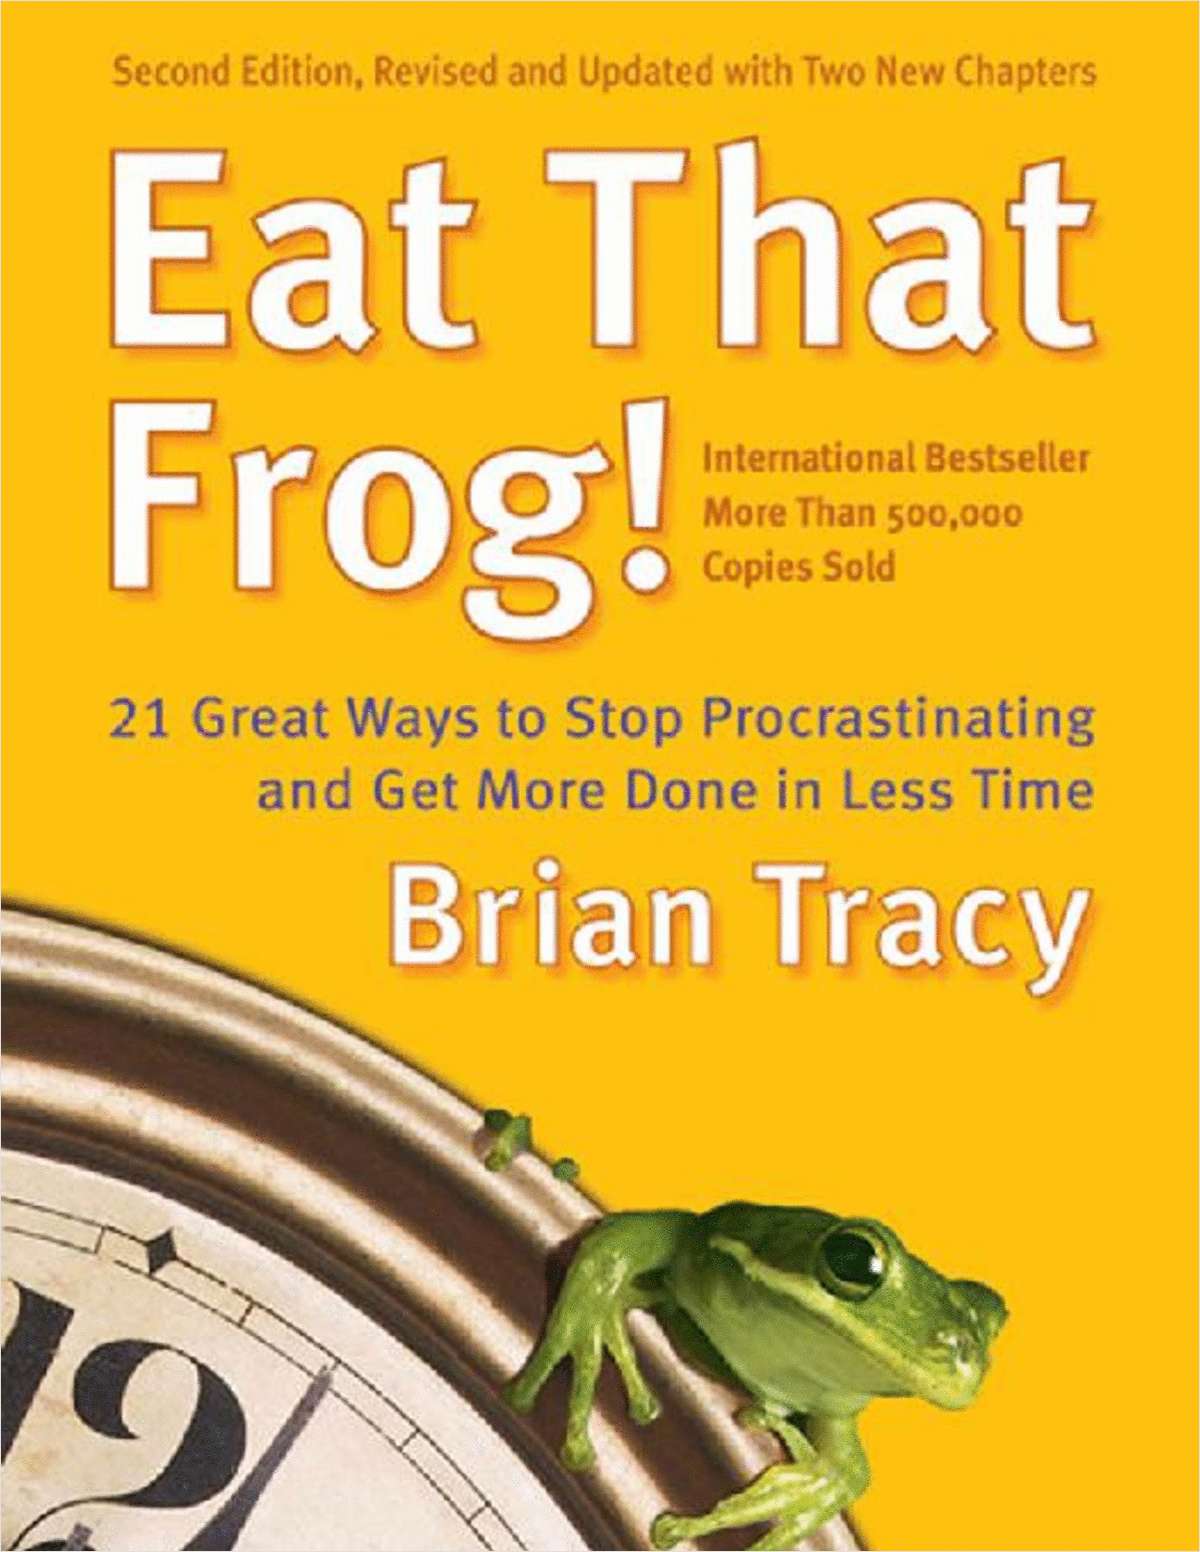 Eat That Frog! 21 Great Ways to Stop Procrastinating and Get More Done in Less Time (A 43 Page Excerpt)